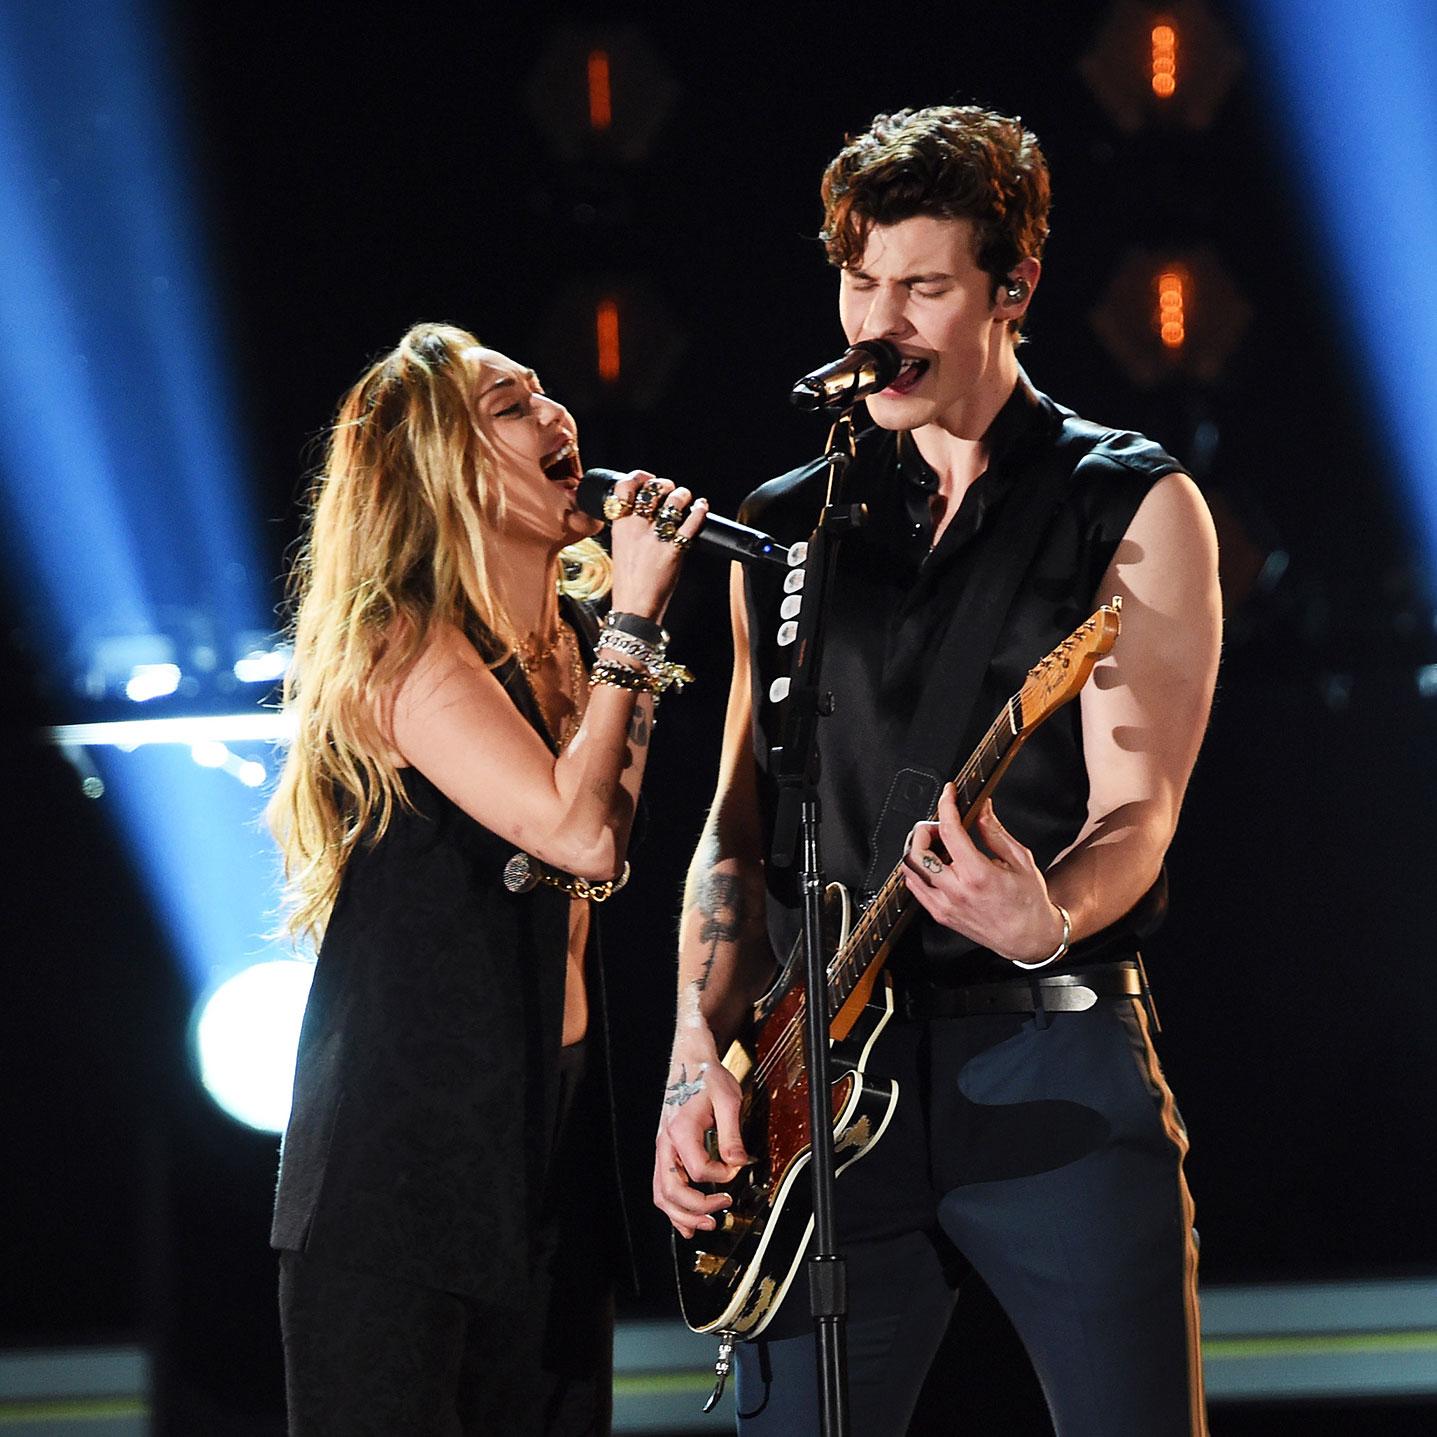 Grammys 2019: Miley Cyrus, Shawn Mendes Perform 'In My Blood'